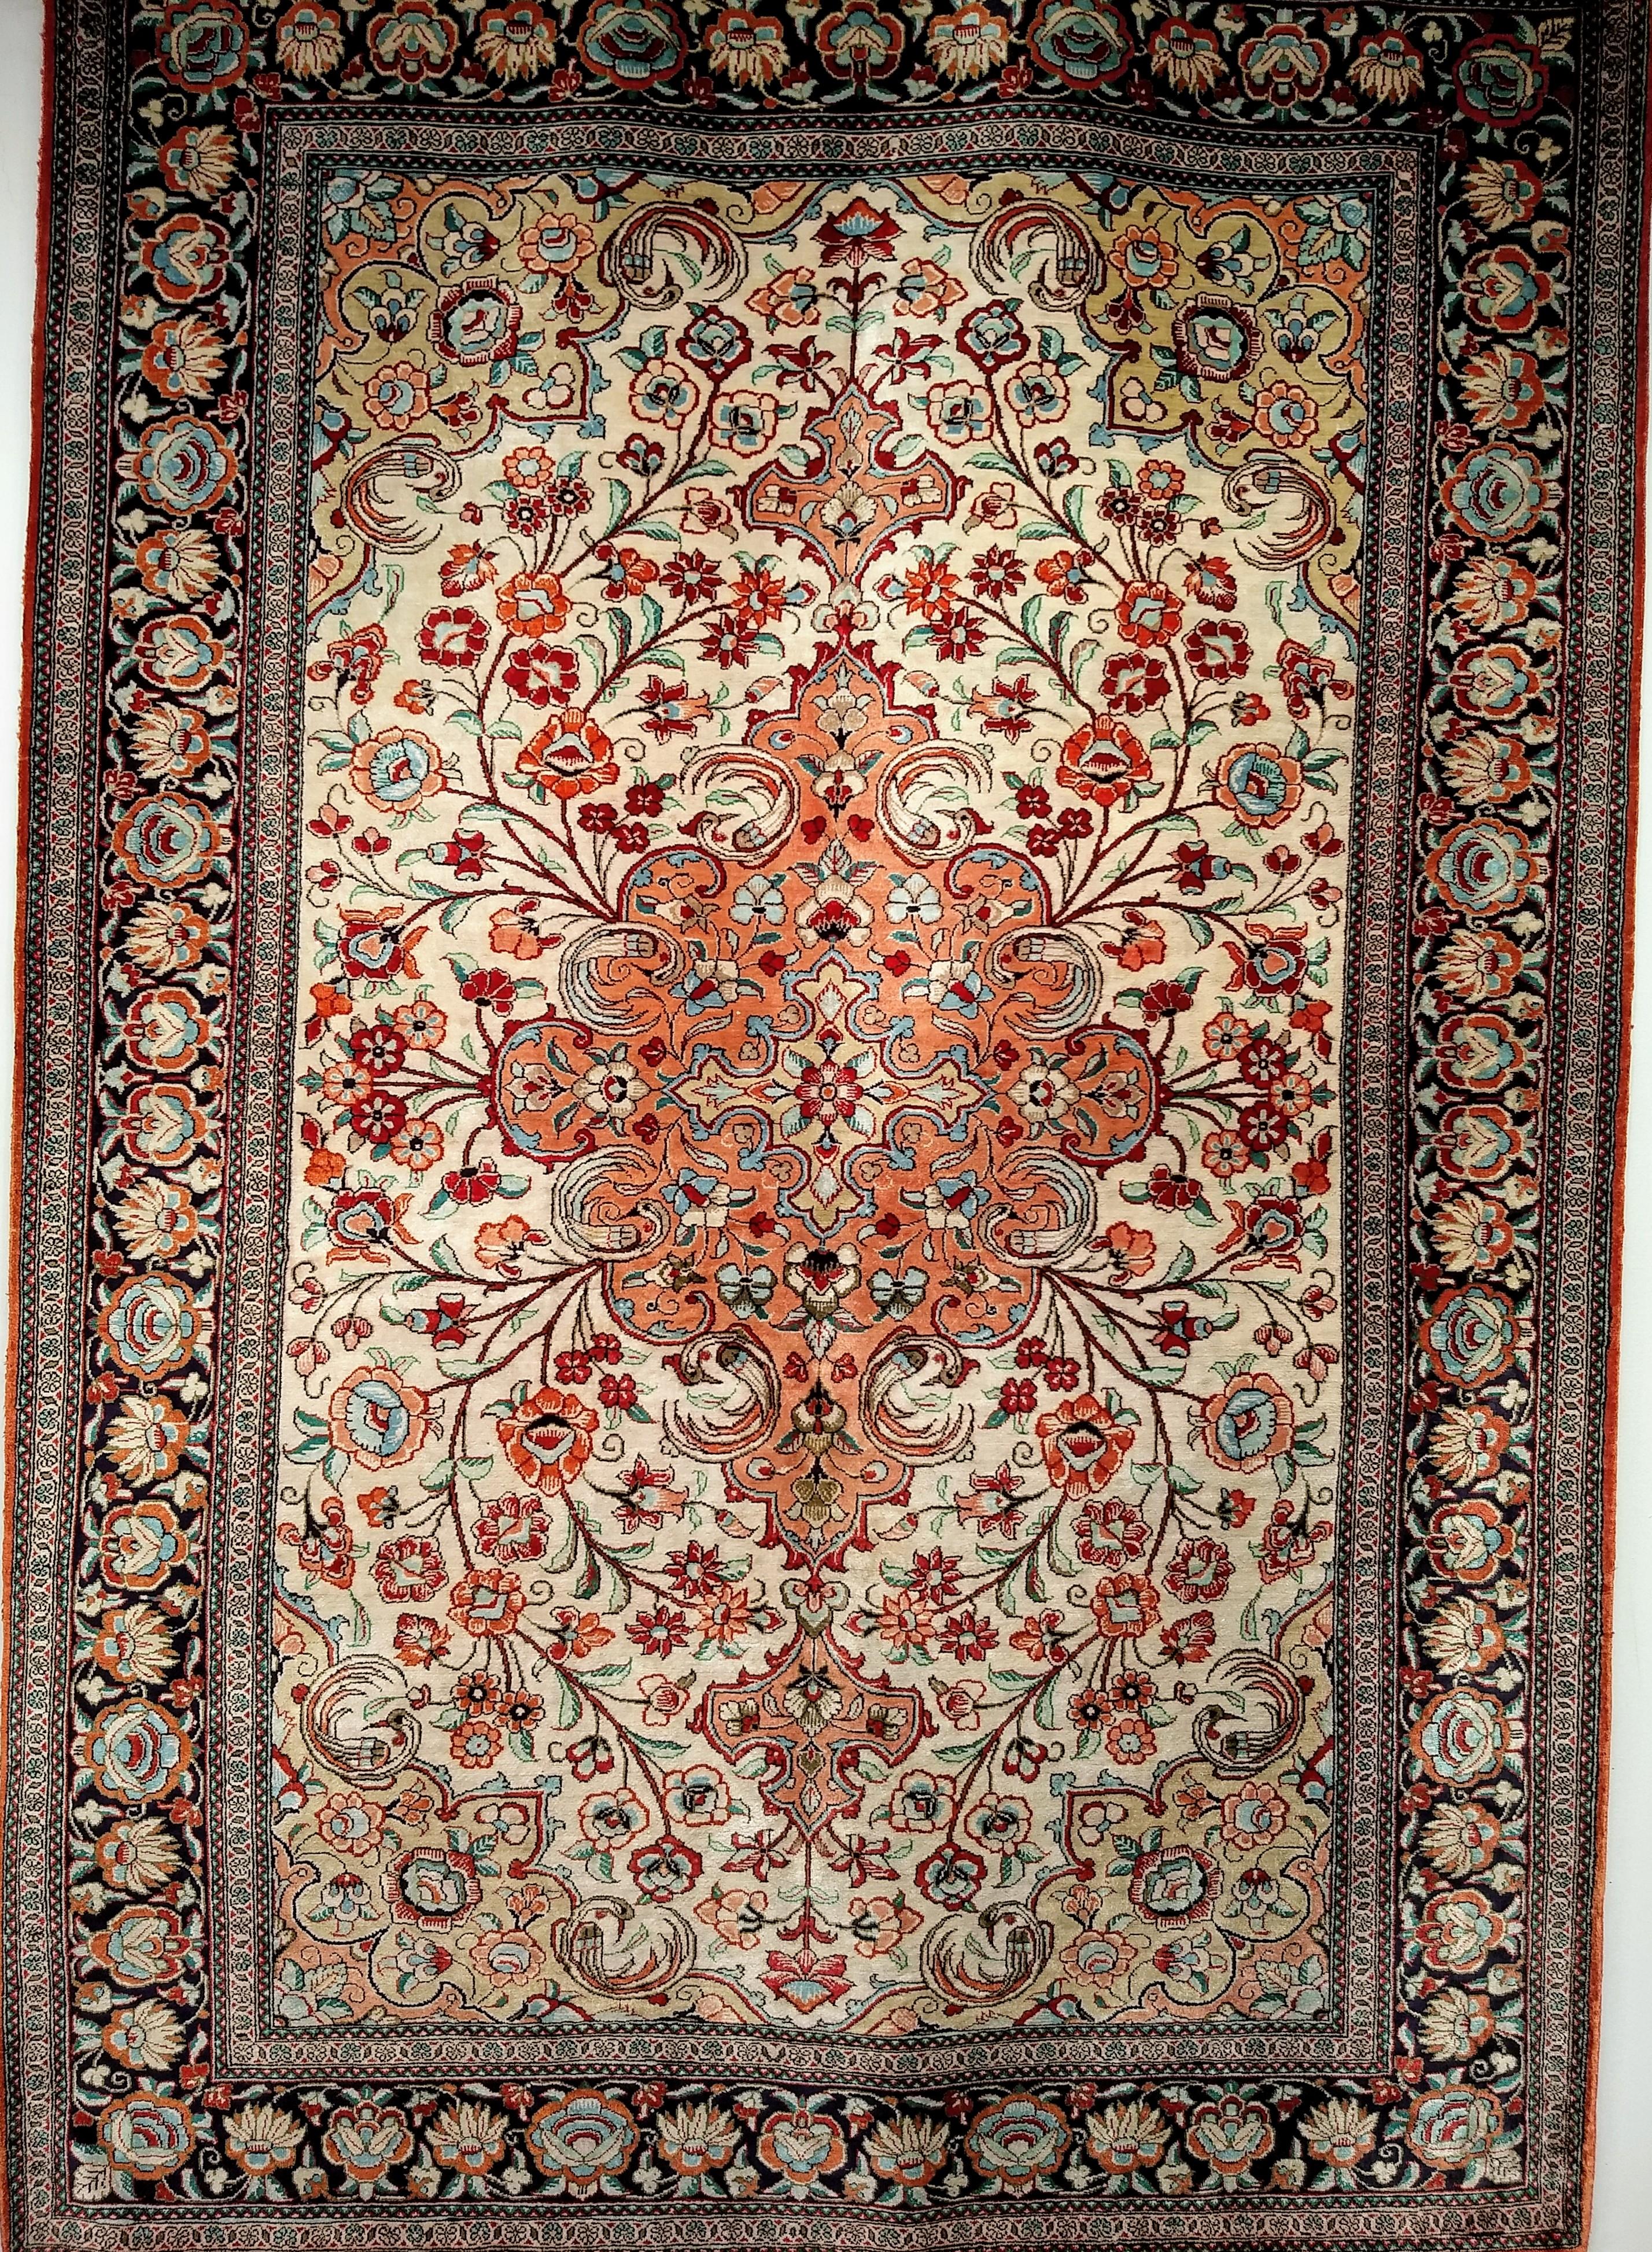 Vintage Persian silk Qum area rug in a floral garden pattern with brilliant colors from the 3rd quarter of the 1900s.  The rug has a beautiful design and great silk color combination that shimmers under light.  All silk (silk pile and foundation) 